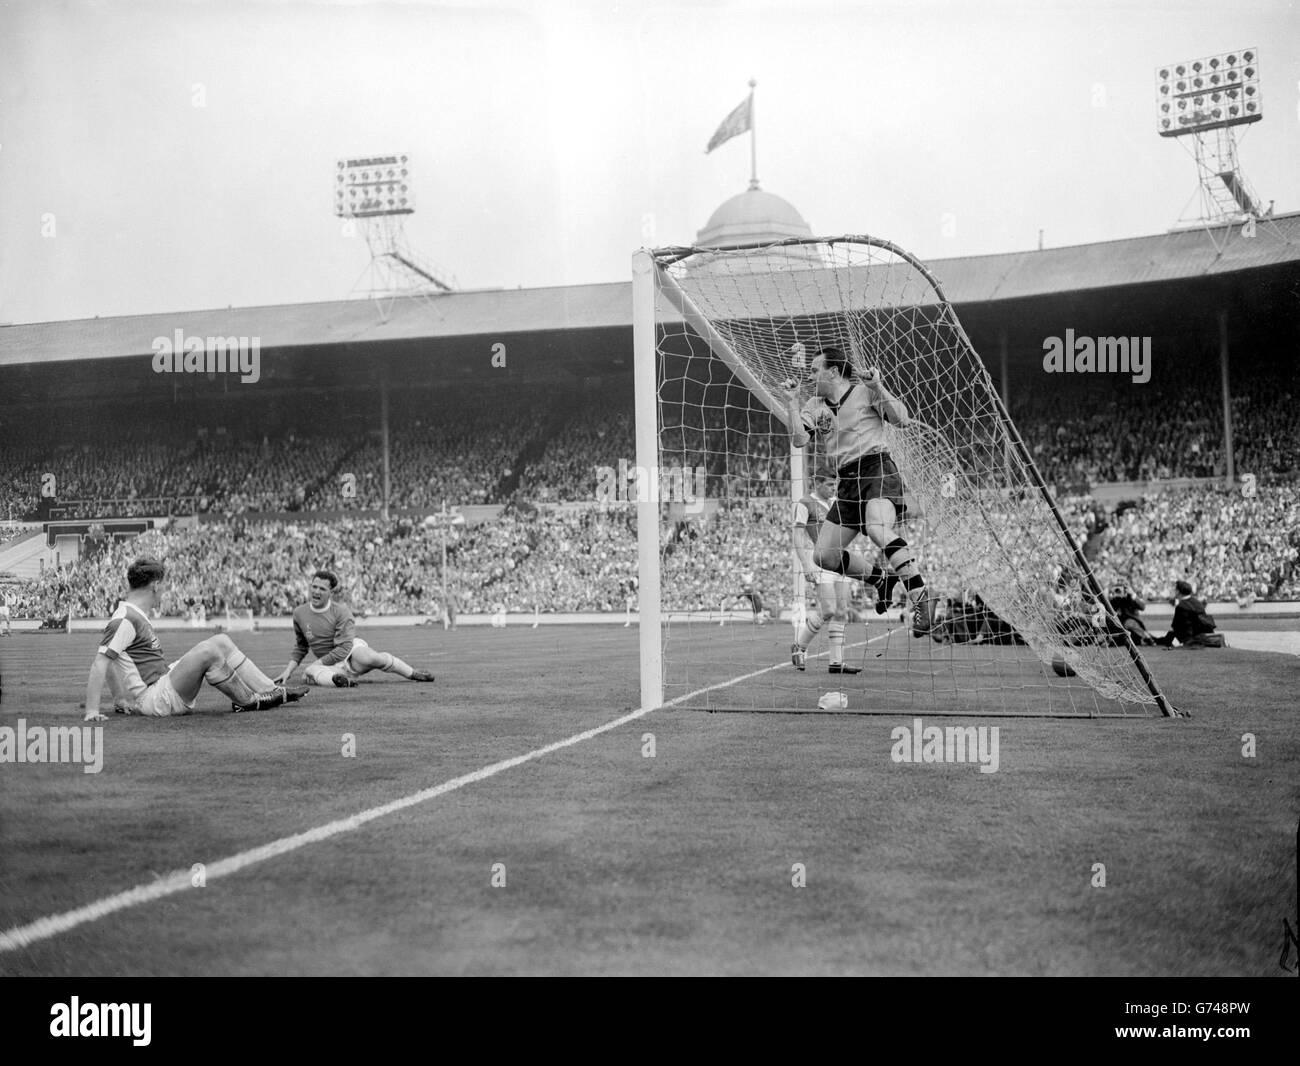 Wolves outside right, Deeley hangs jubilantly on the netting after chasing an 'own goal' over the line while outside the goal Blackburn keeper Leyland (centre) and left half McGrath, the scorer, seem to be holding a sit down enquiry. Disconsolate Blackburn left back Dave Whelen goes in to pick up the ball. He later broke his leg and was taken to hospital. This incident opened the scoring for Wolves and they went on to win 3-0. Stock Photo